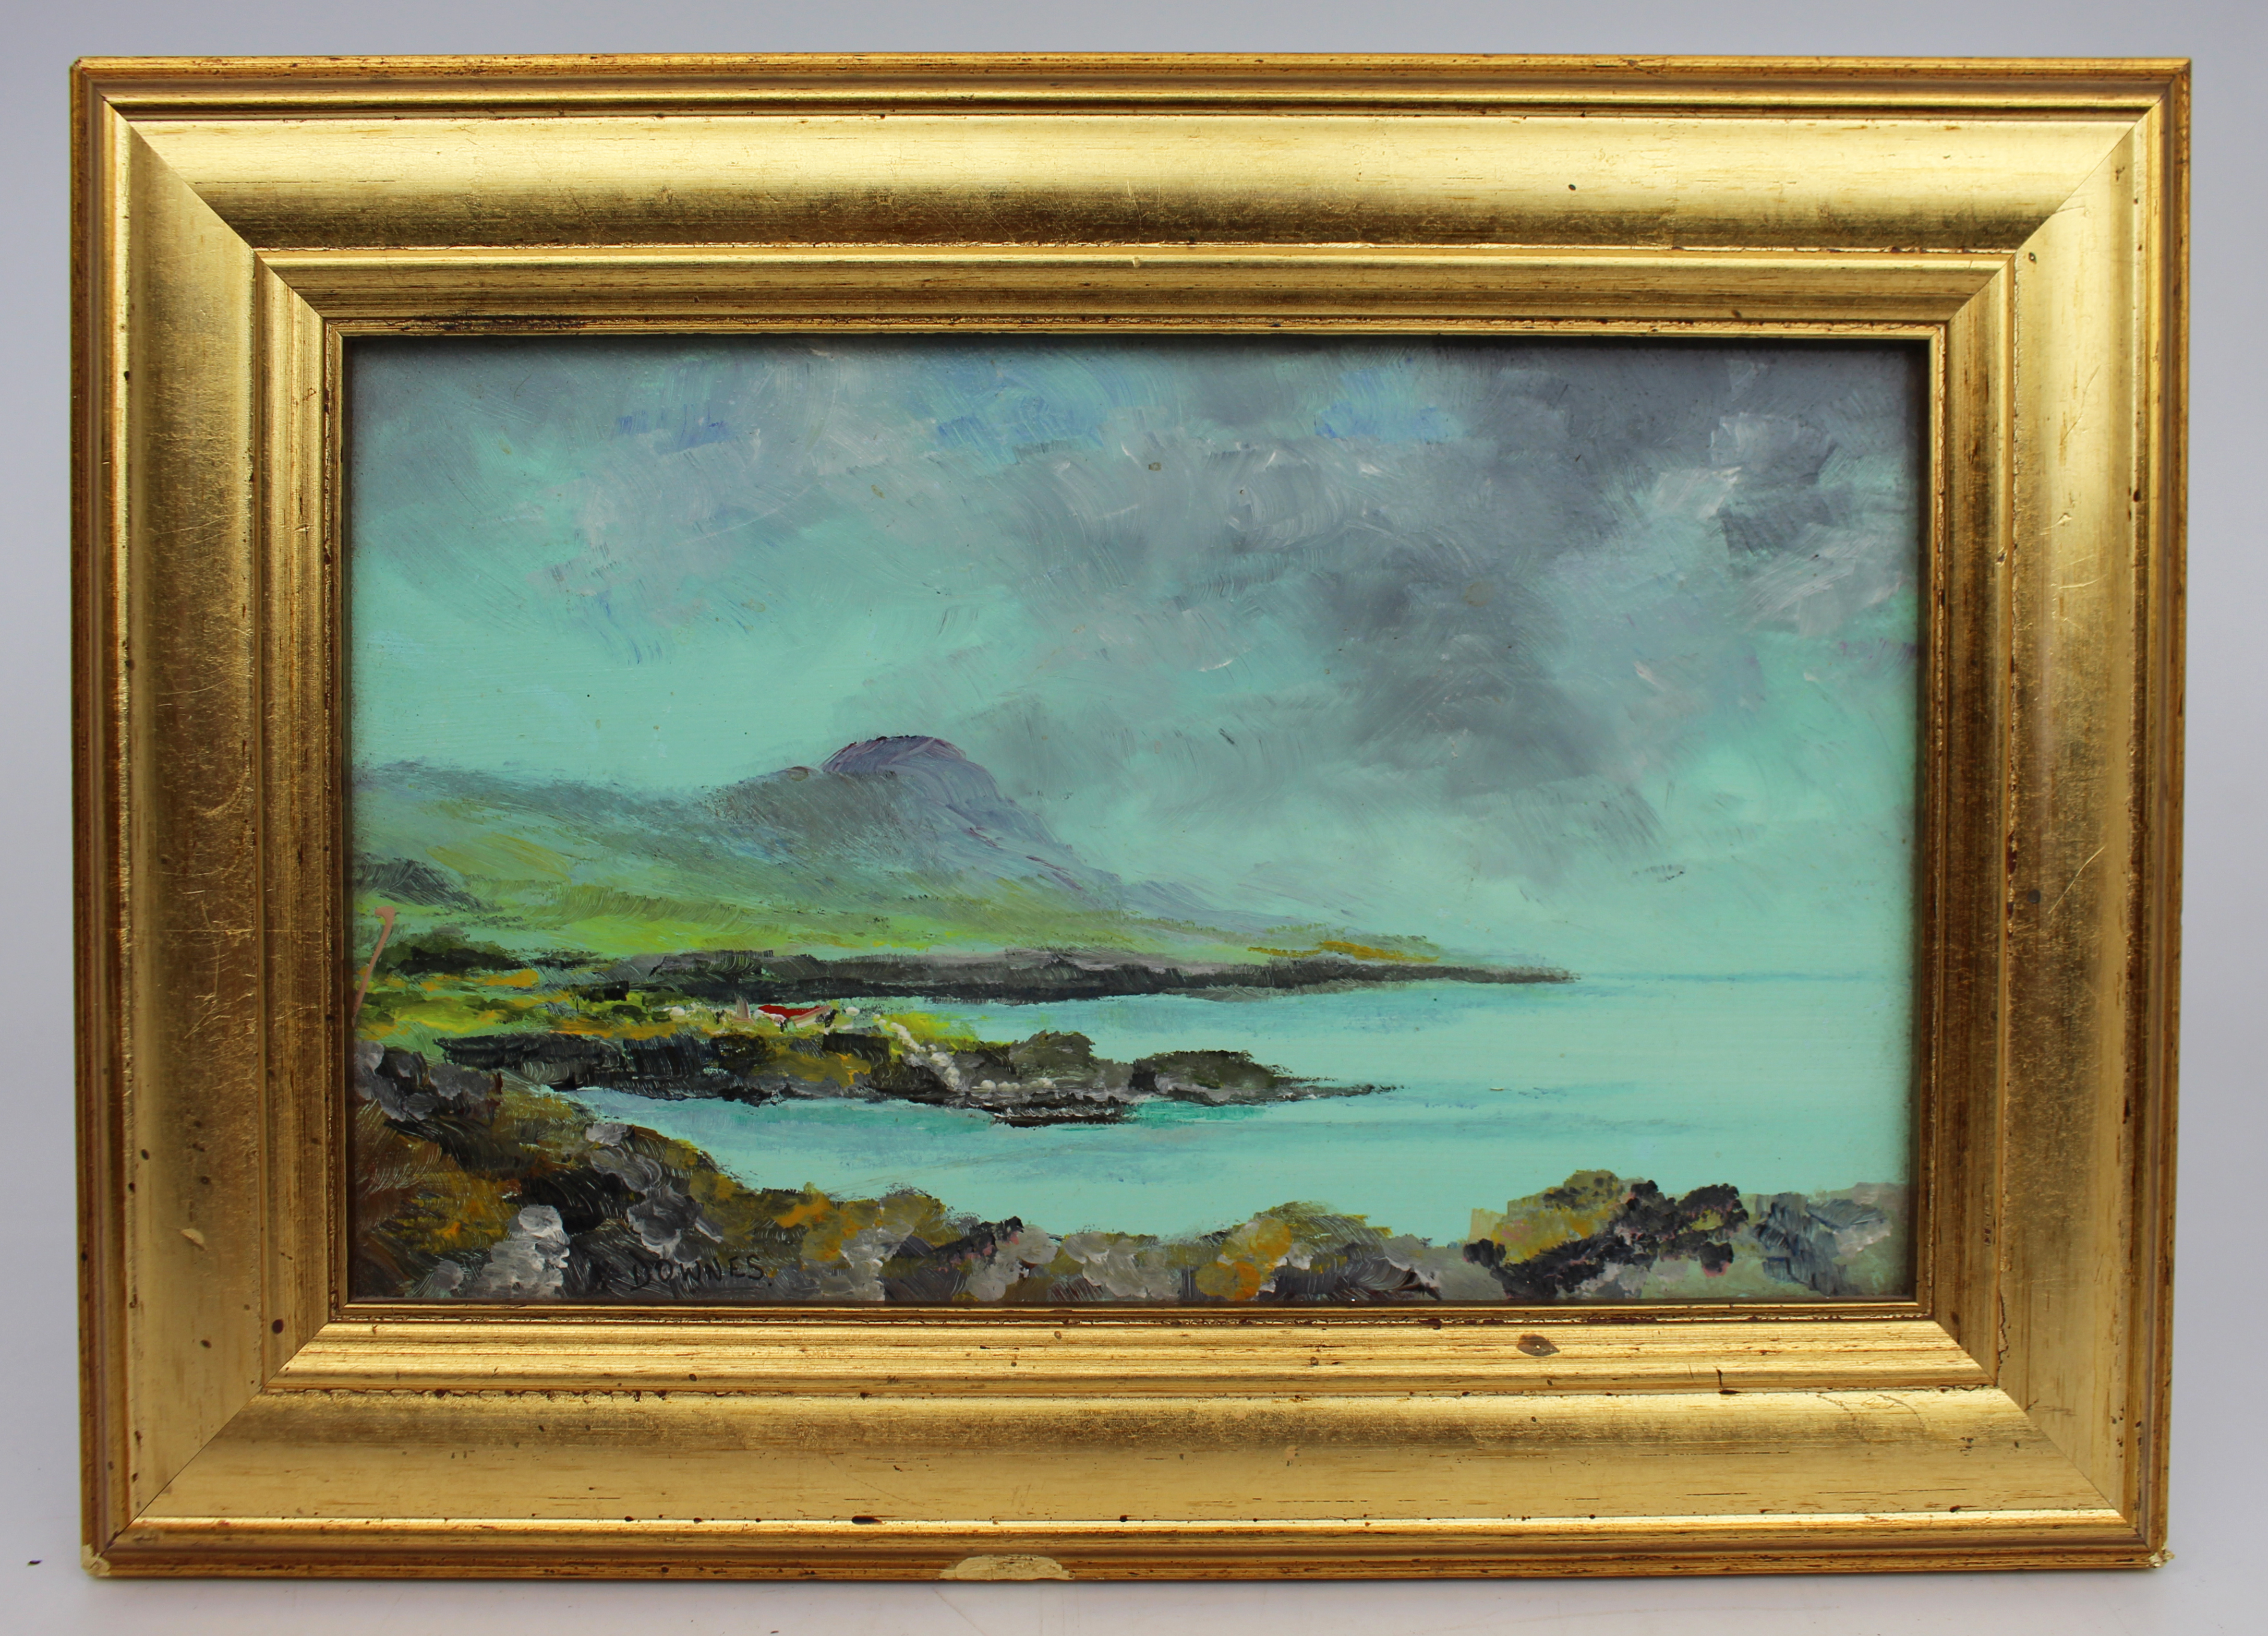 Irish Landscape by Michael F. Downes Oil on Board - Image 3 of 4